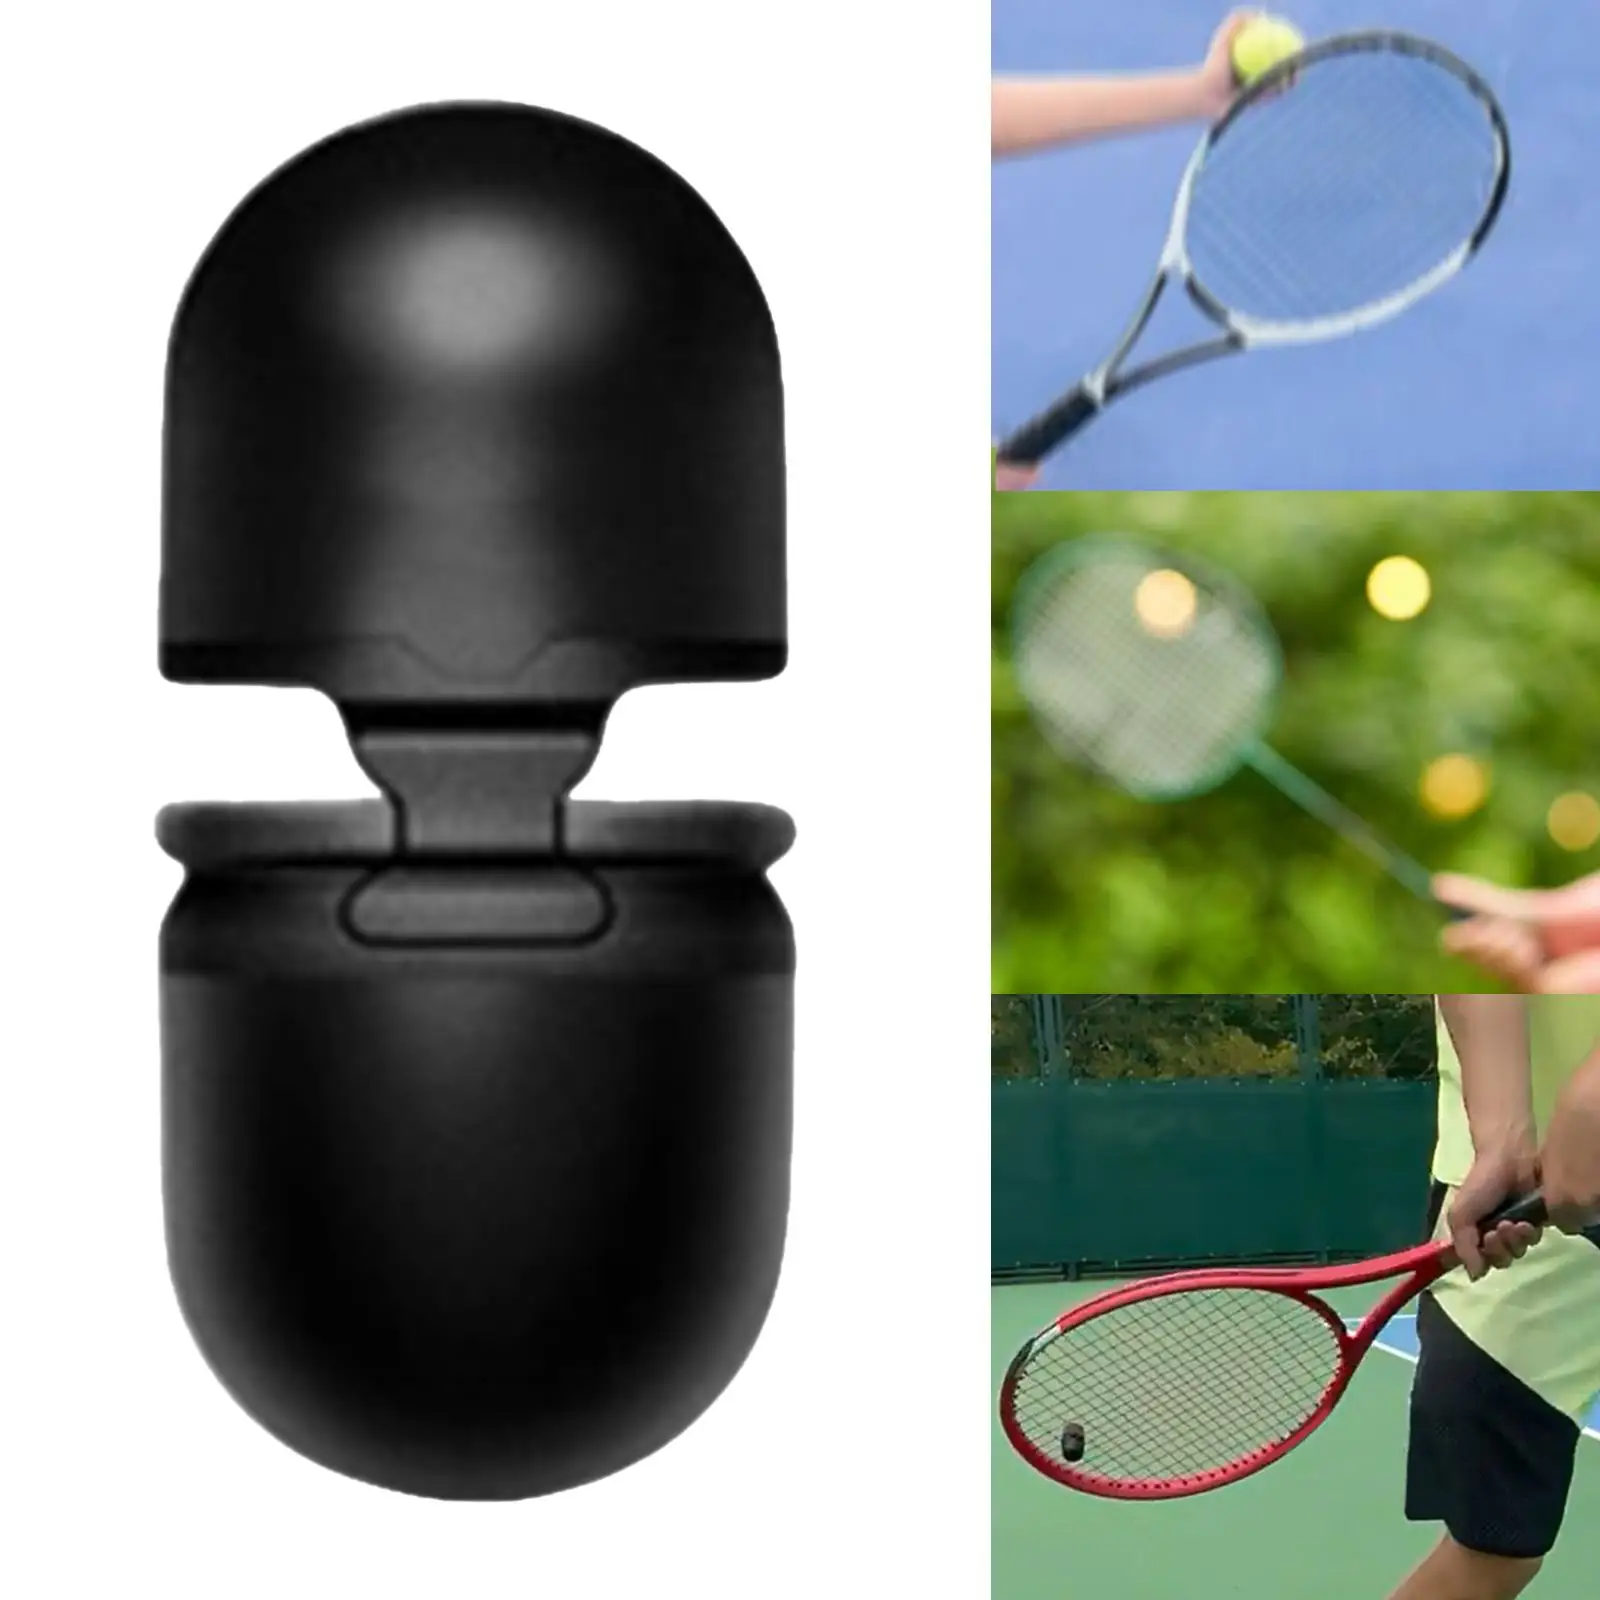 Tennis Topspin Whistle Training Tool for Beginners Adults Kids Coaches